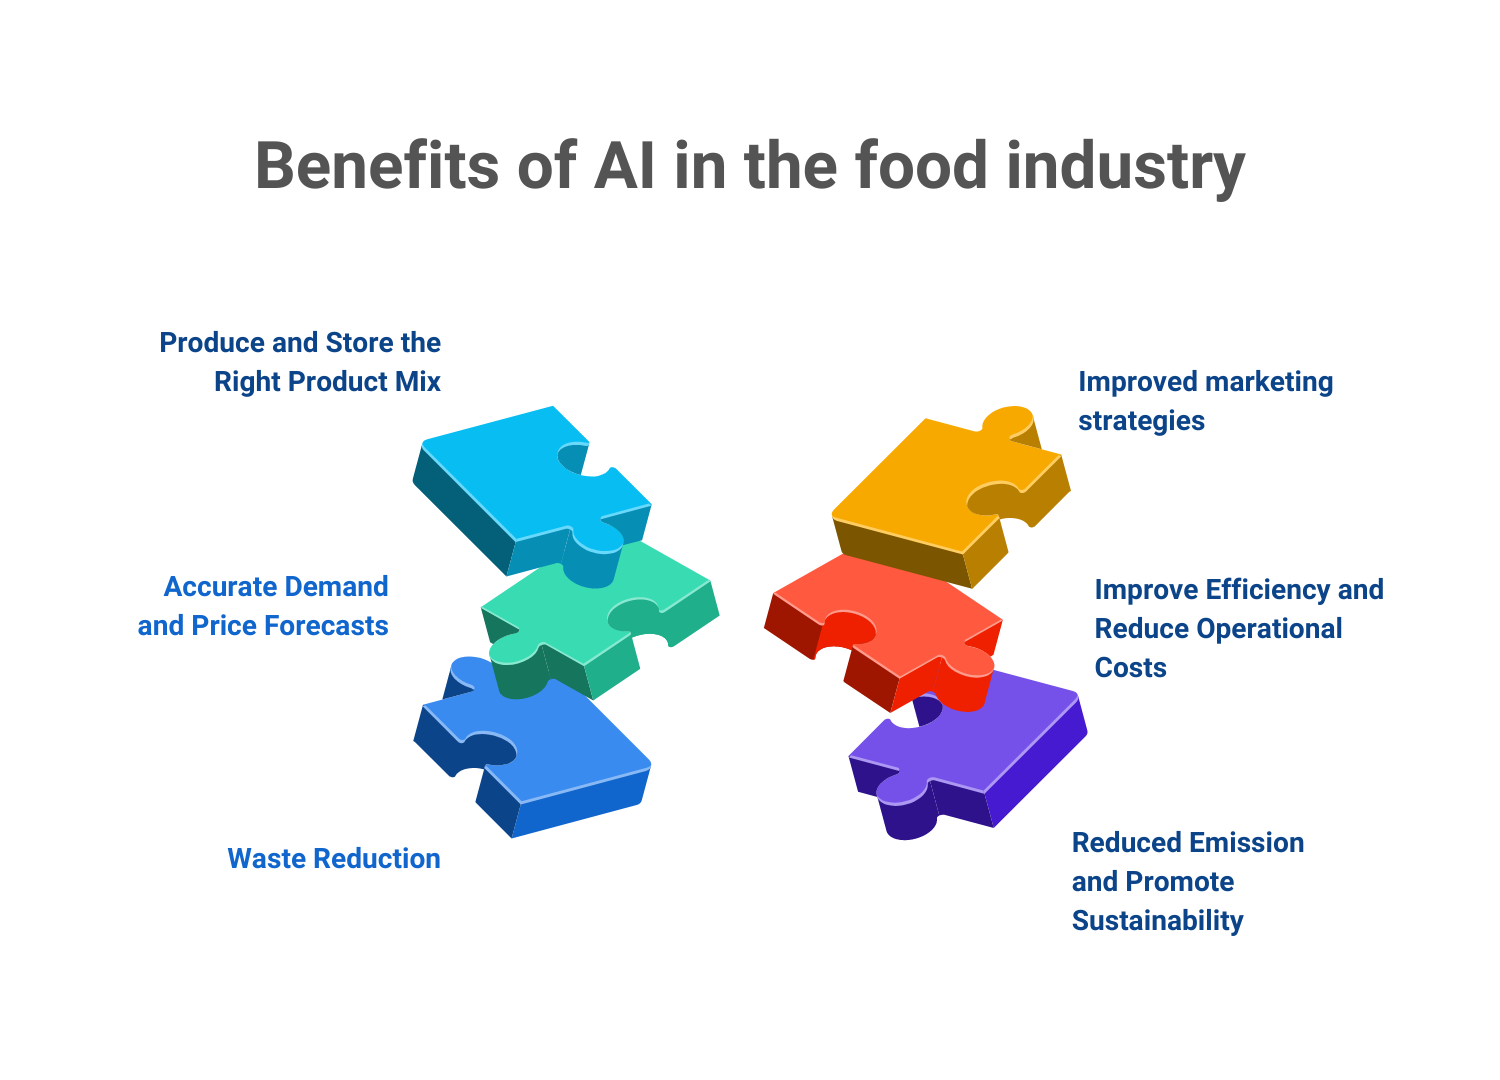 Benefits of AI in Food industry